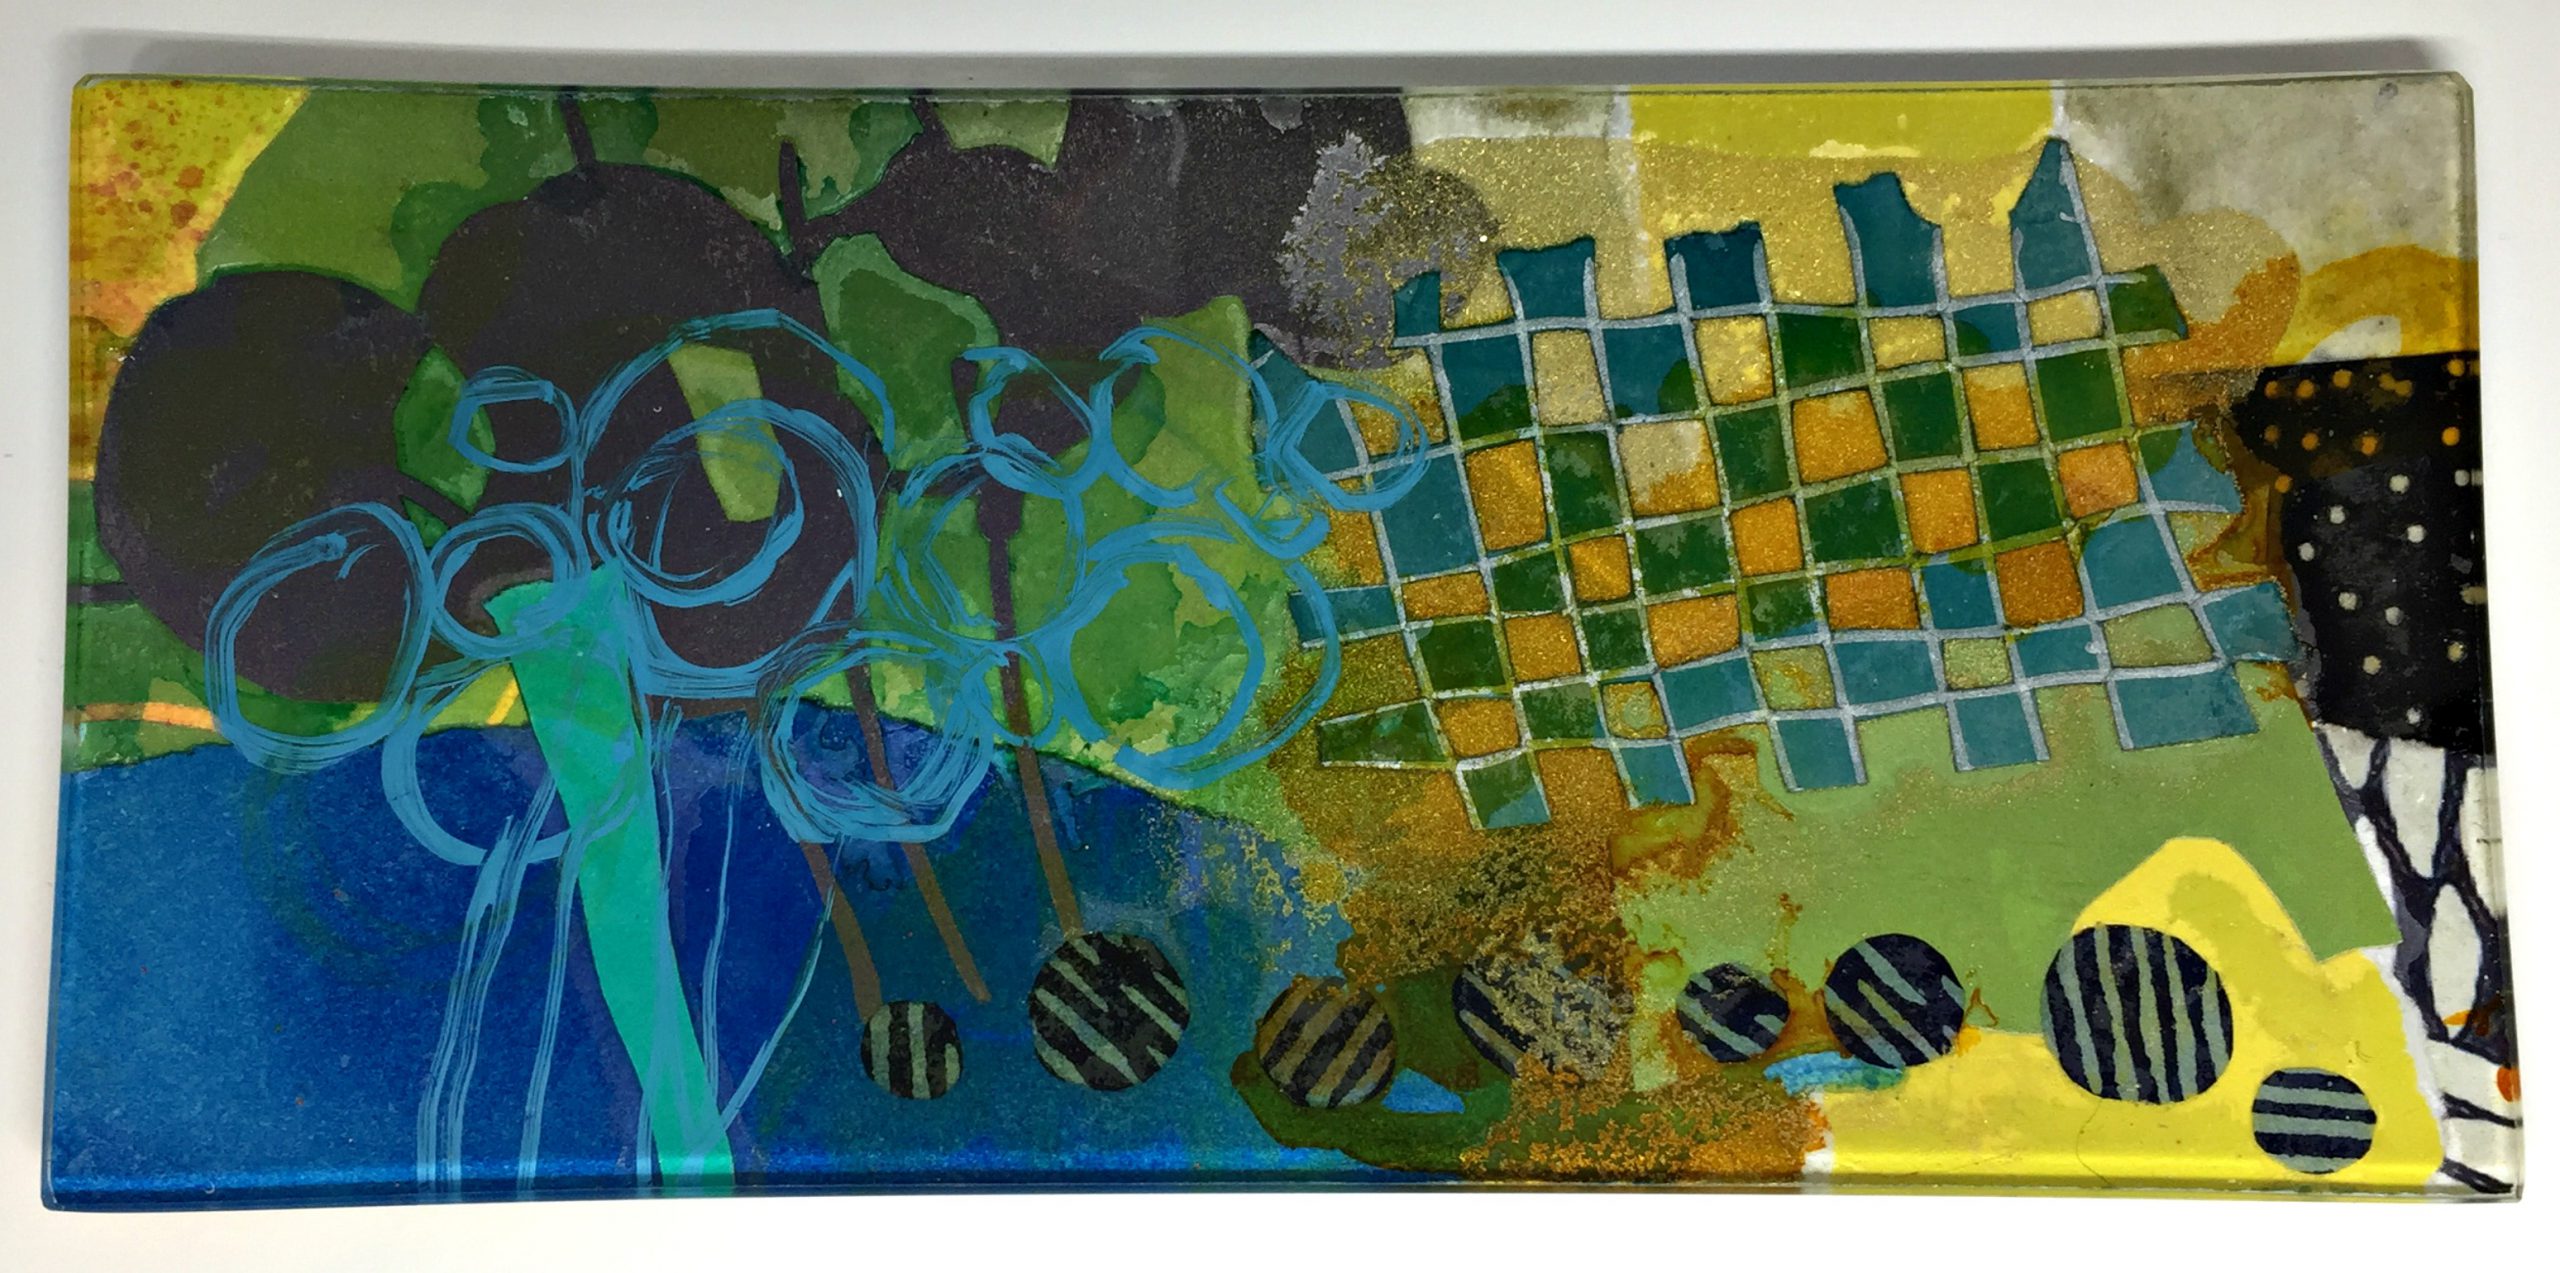 View Over Fields, glass mini platter by Julie Bell | Effusion Art Gallery + Cast Glass Studio, Invermere BC